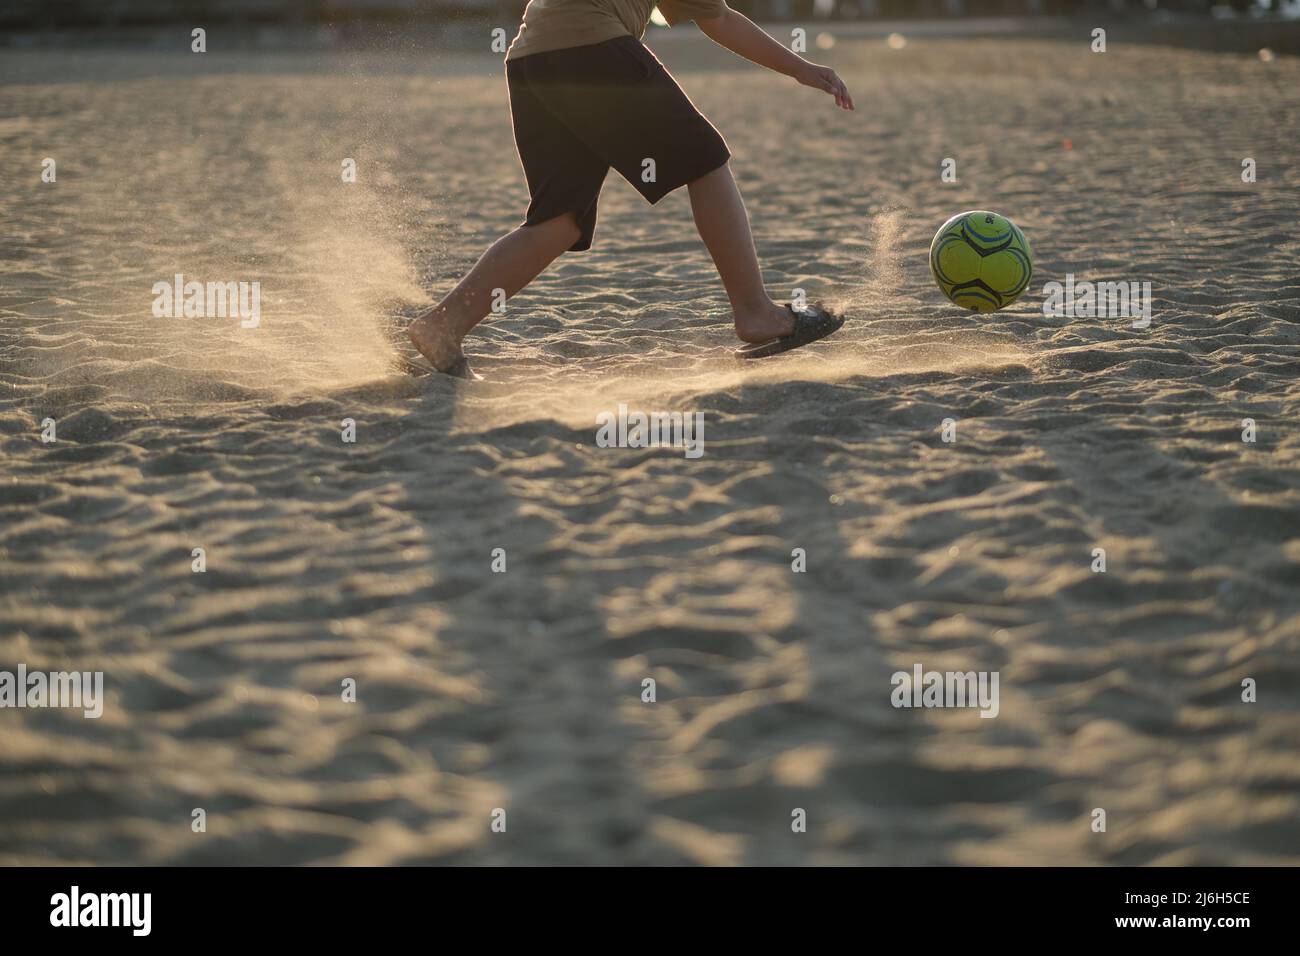 Playing football on the beach, with sand illuminated by sun Stock Photo